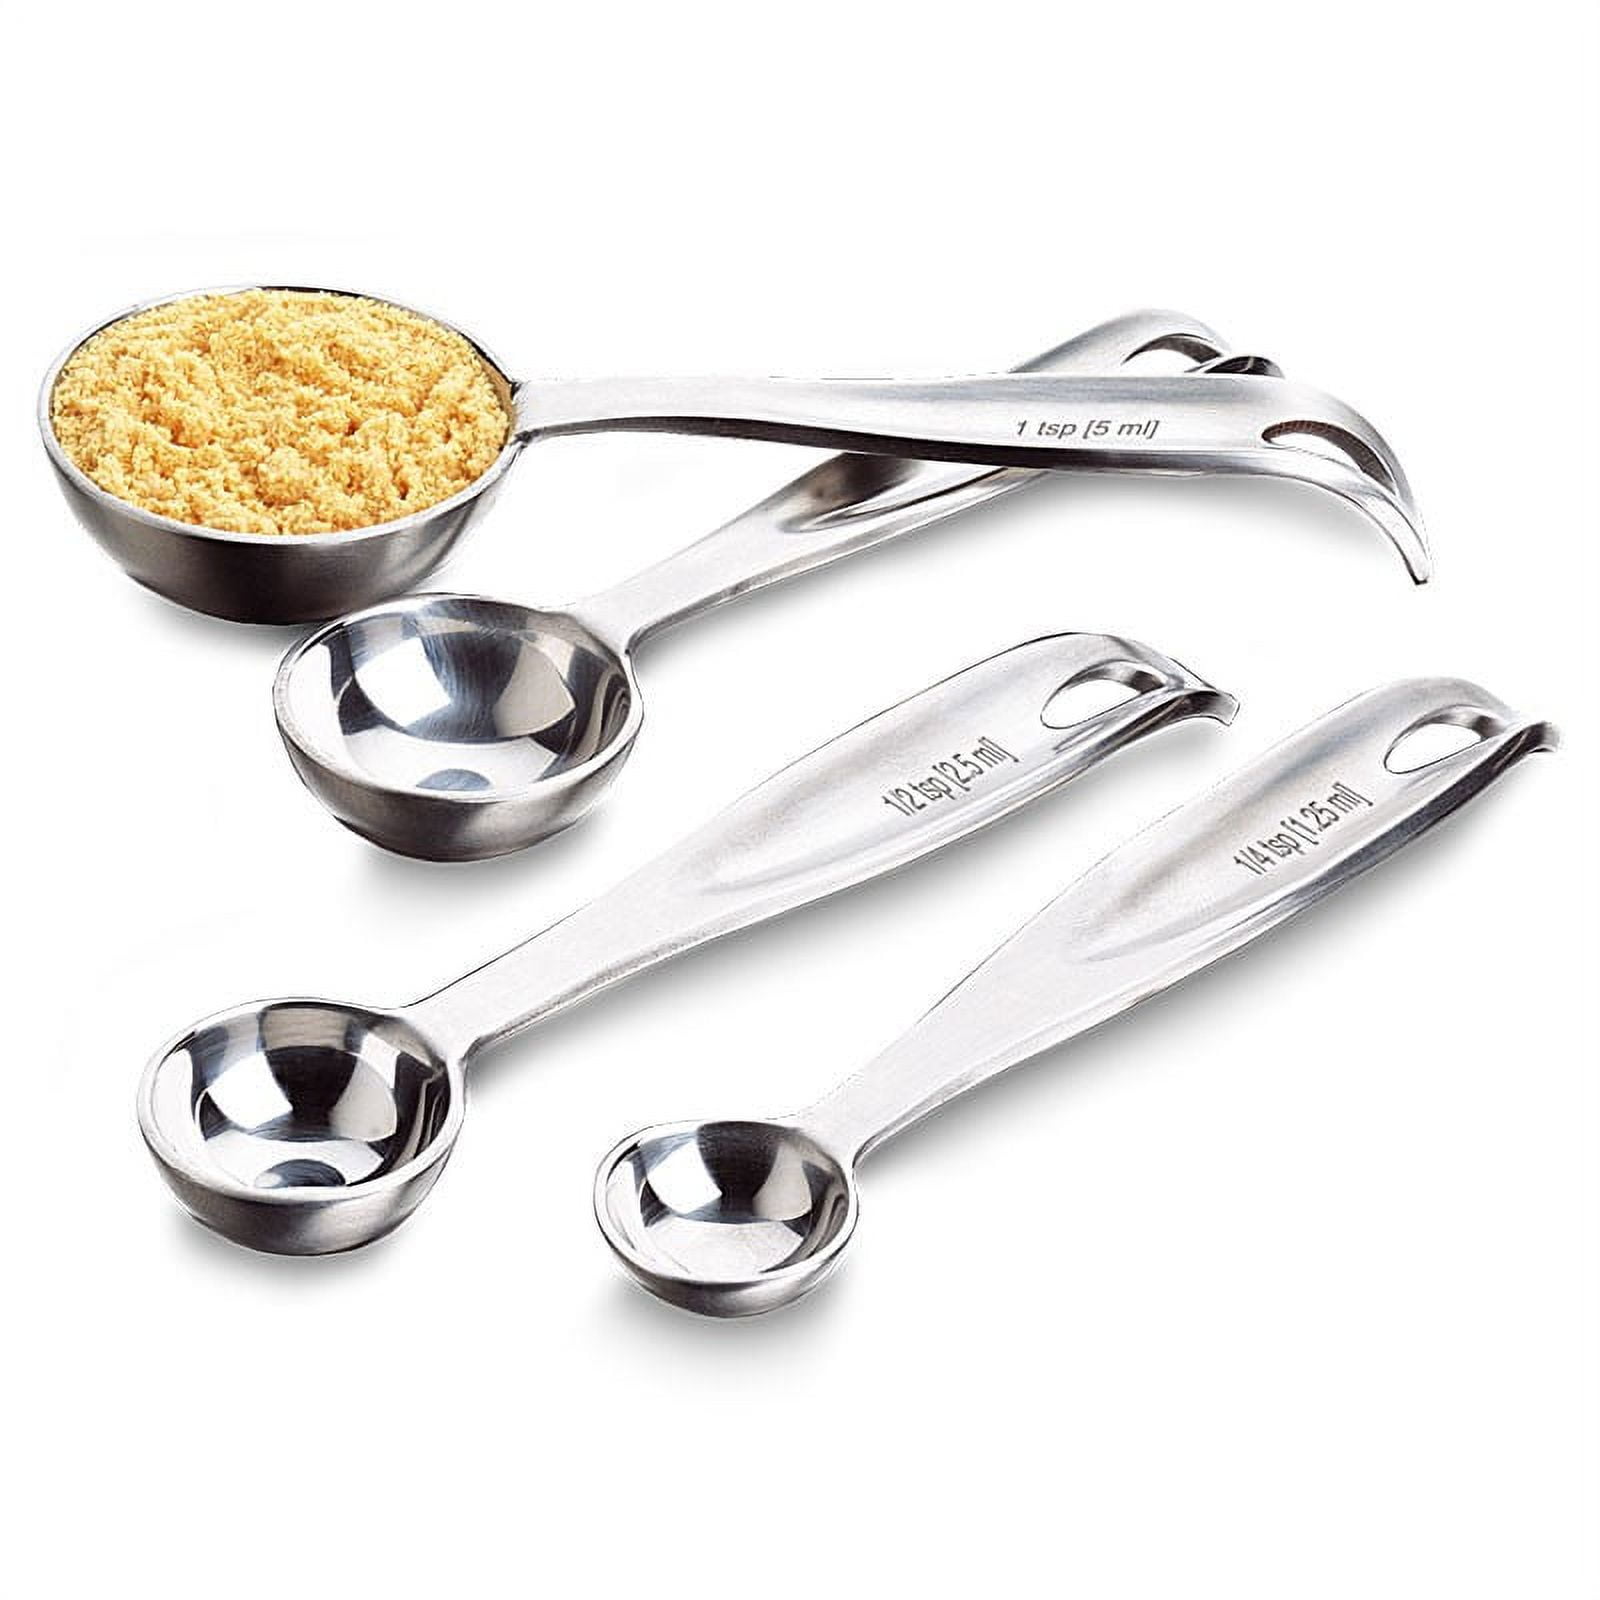  Amco Measuring Spoons, Assorted, Silver : Everything Else